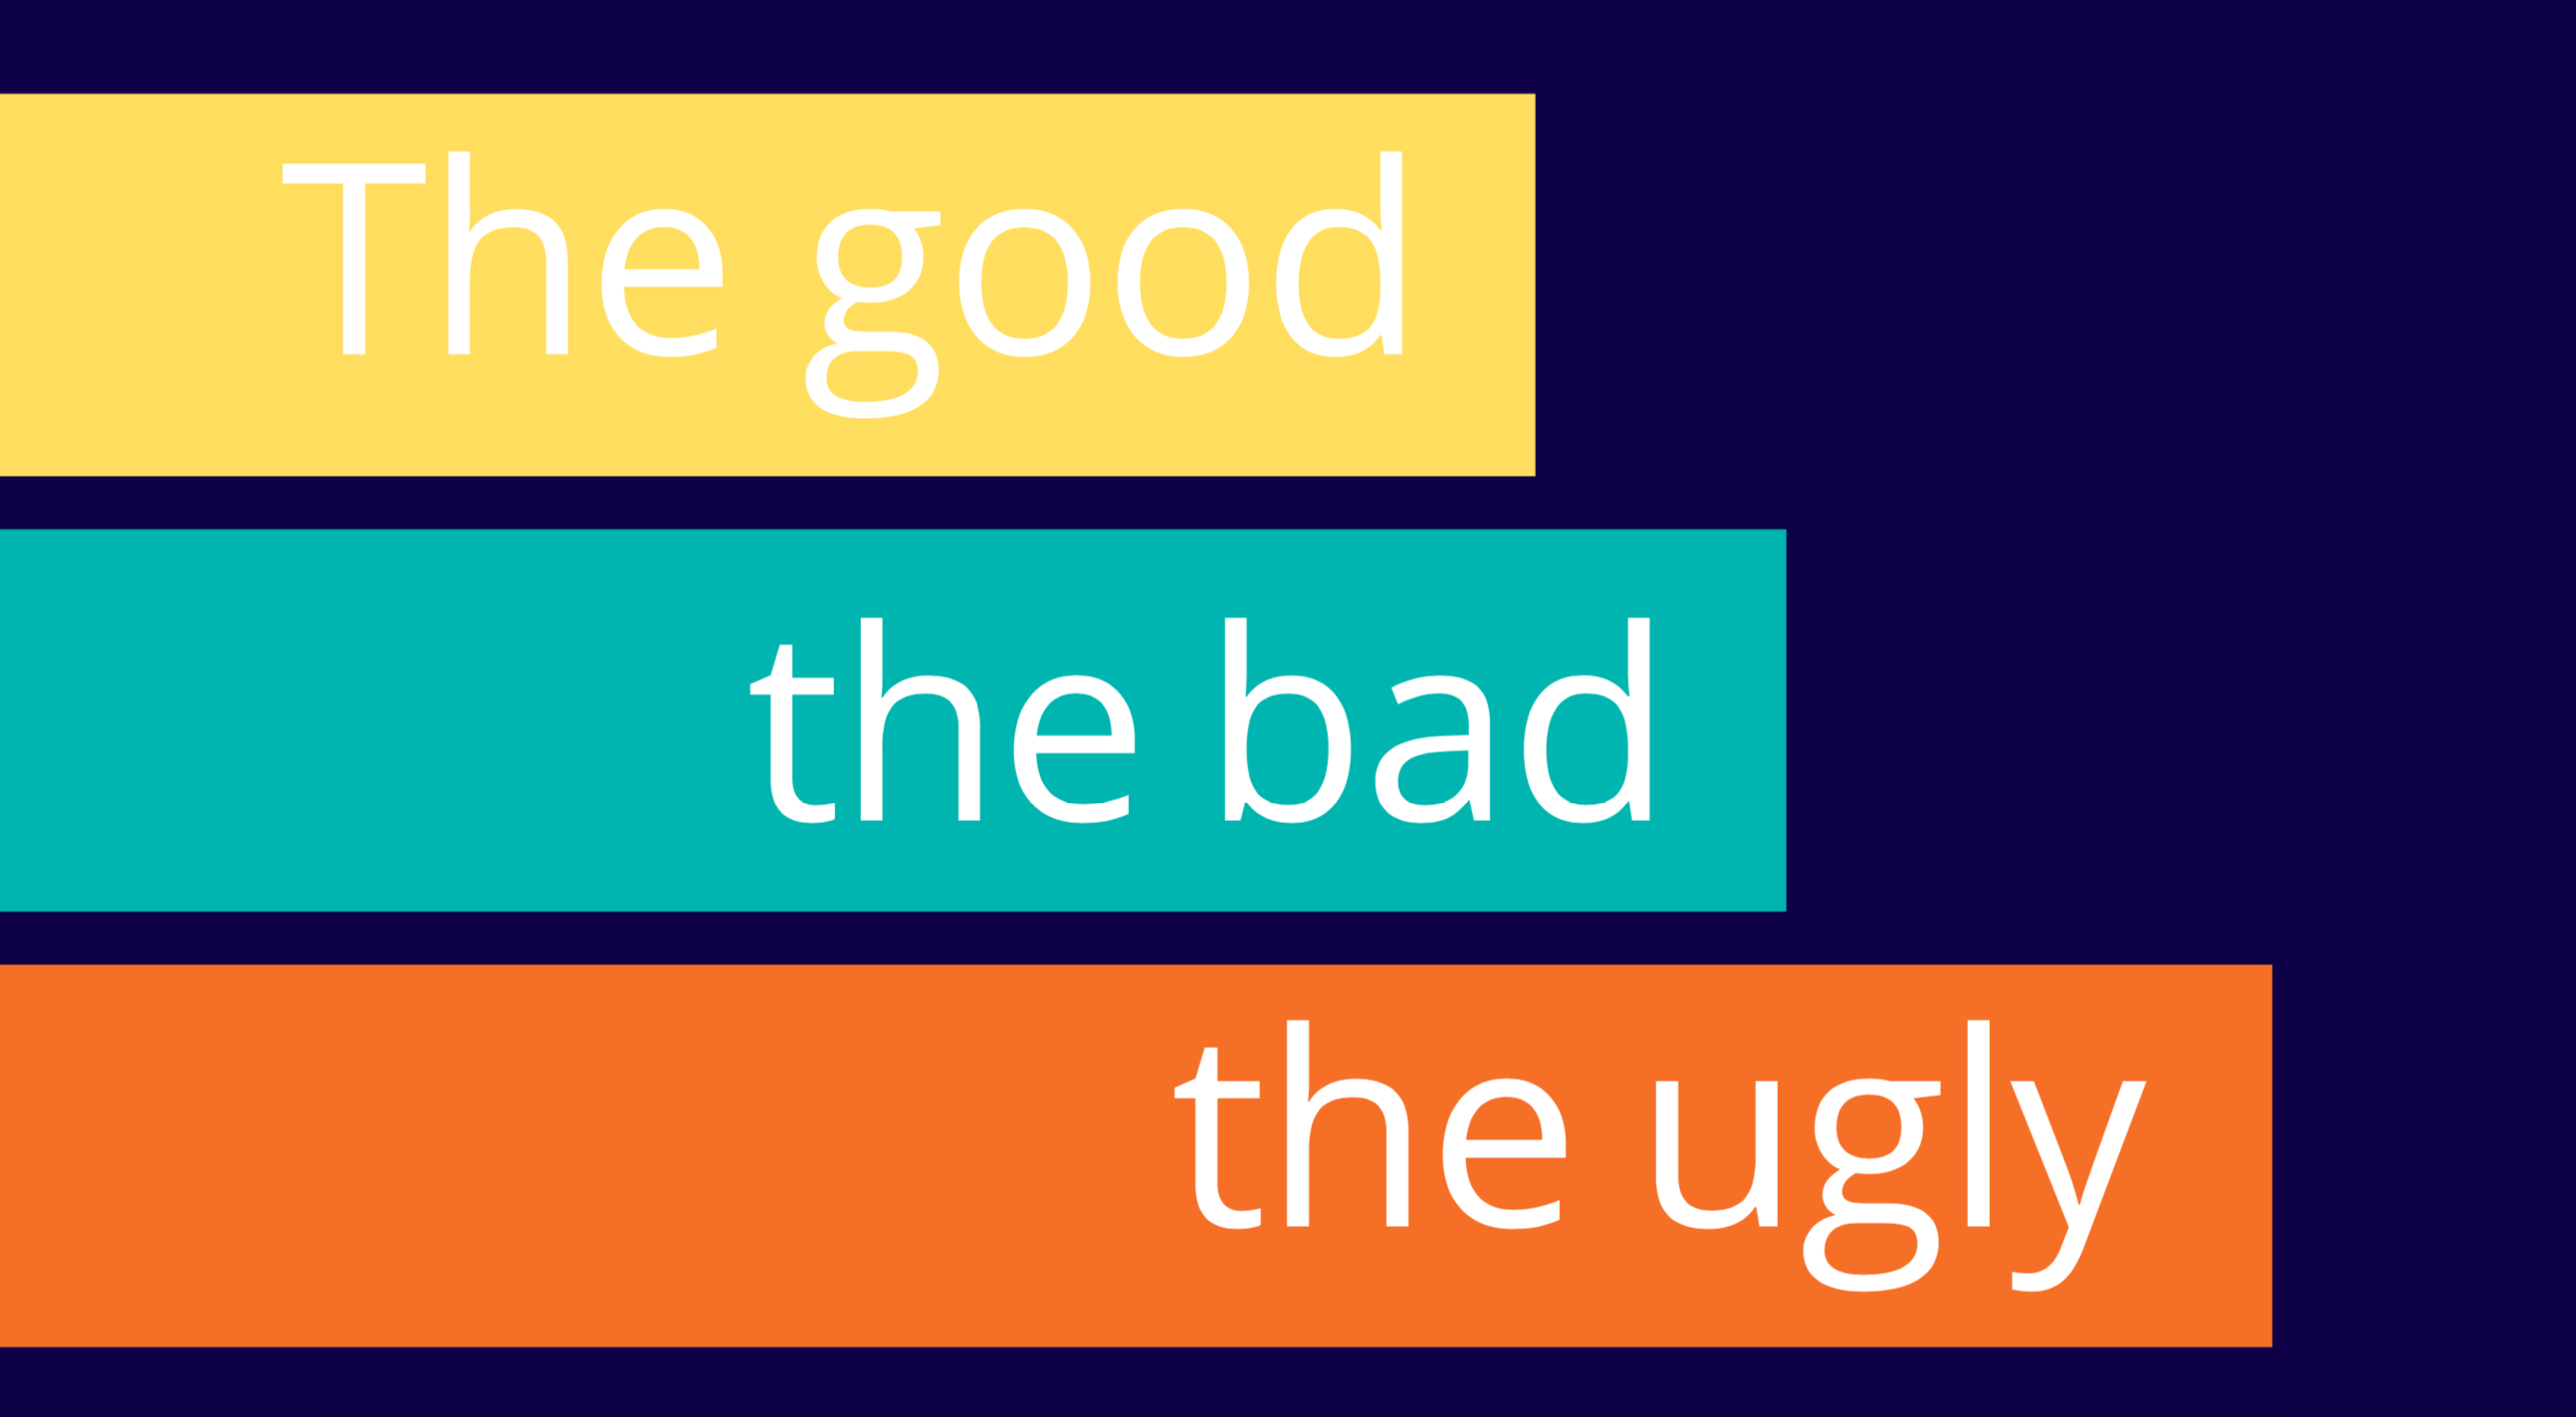 The good the bad the ugly